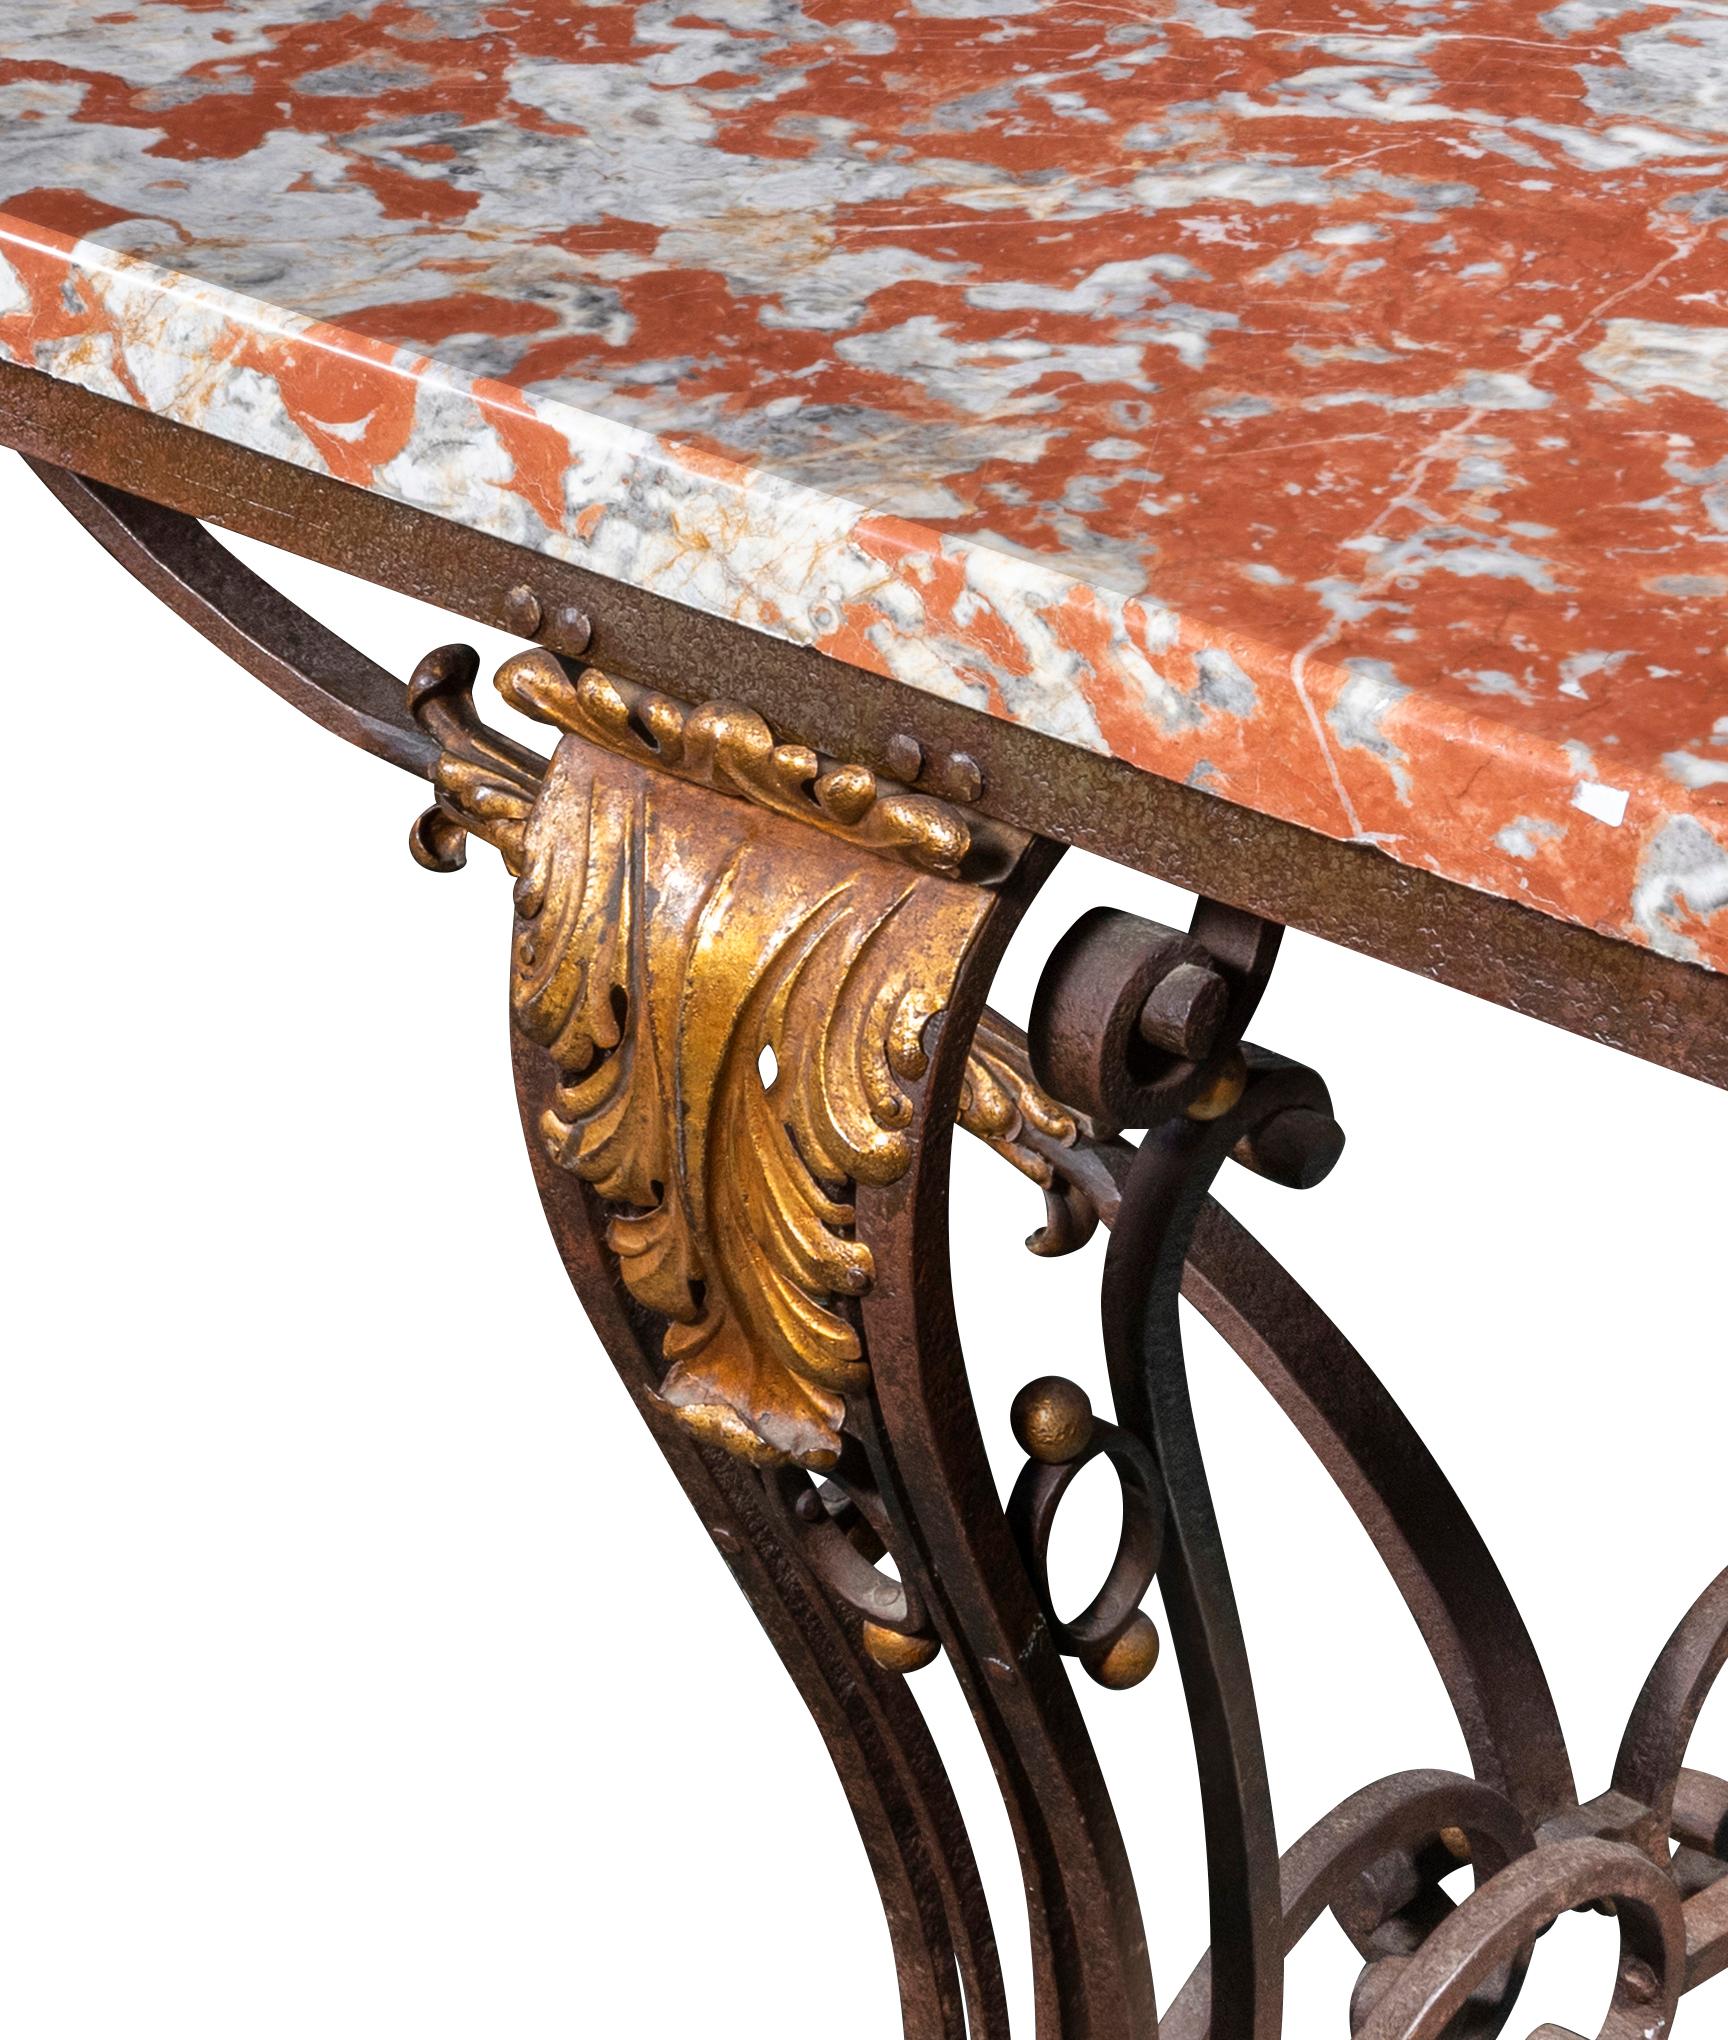 wrought iron marble top table